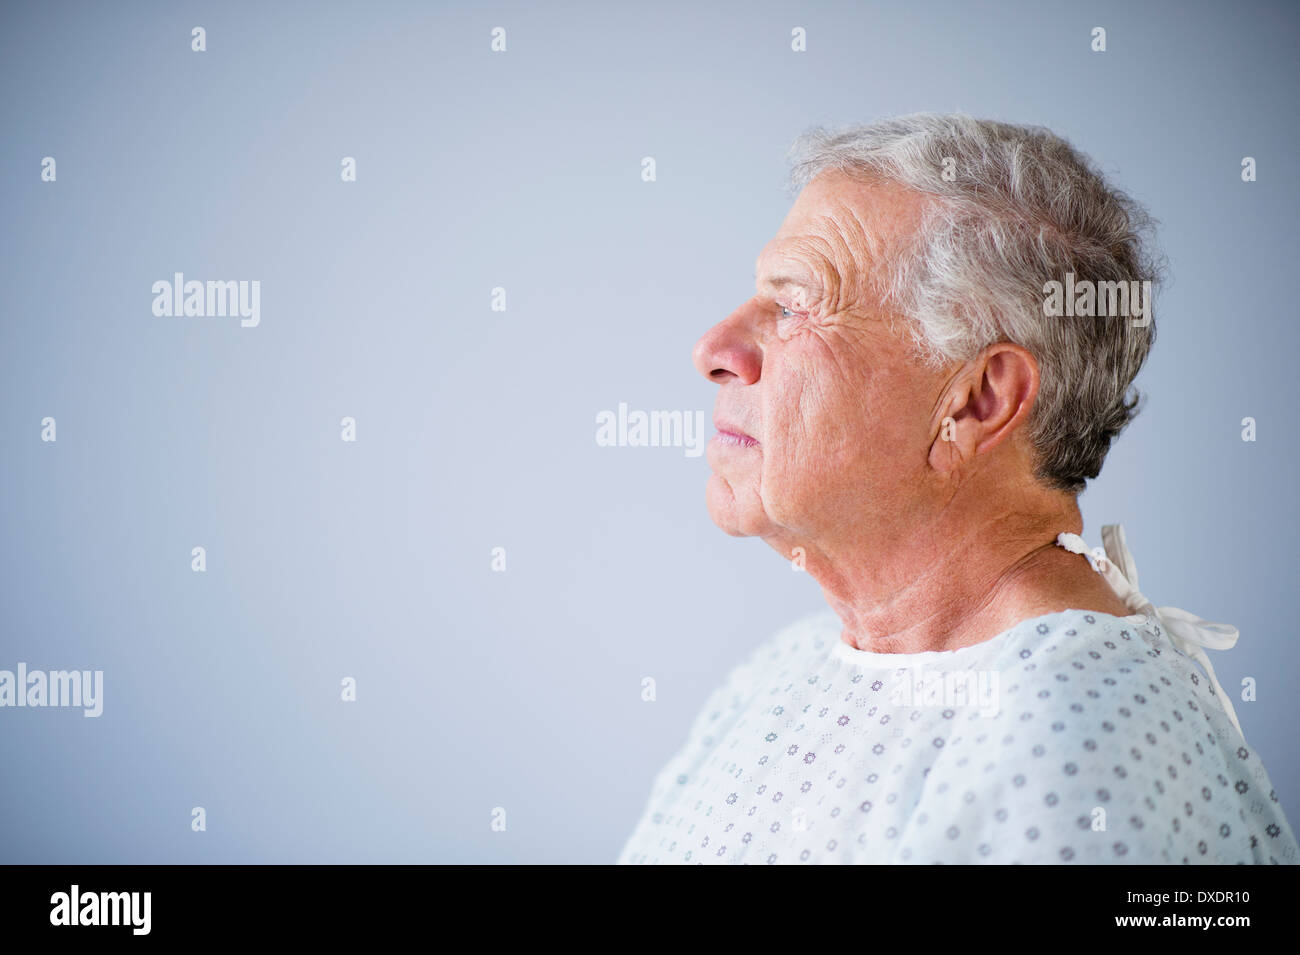 Side view of senior patient Stock Photo